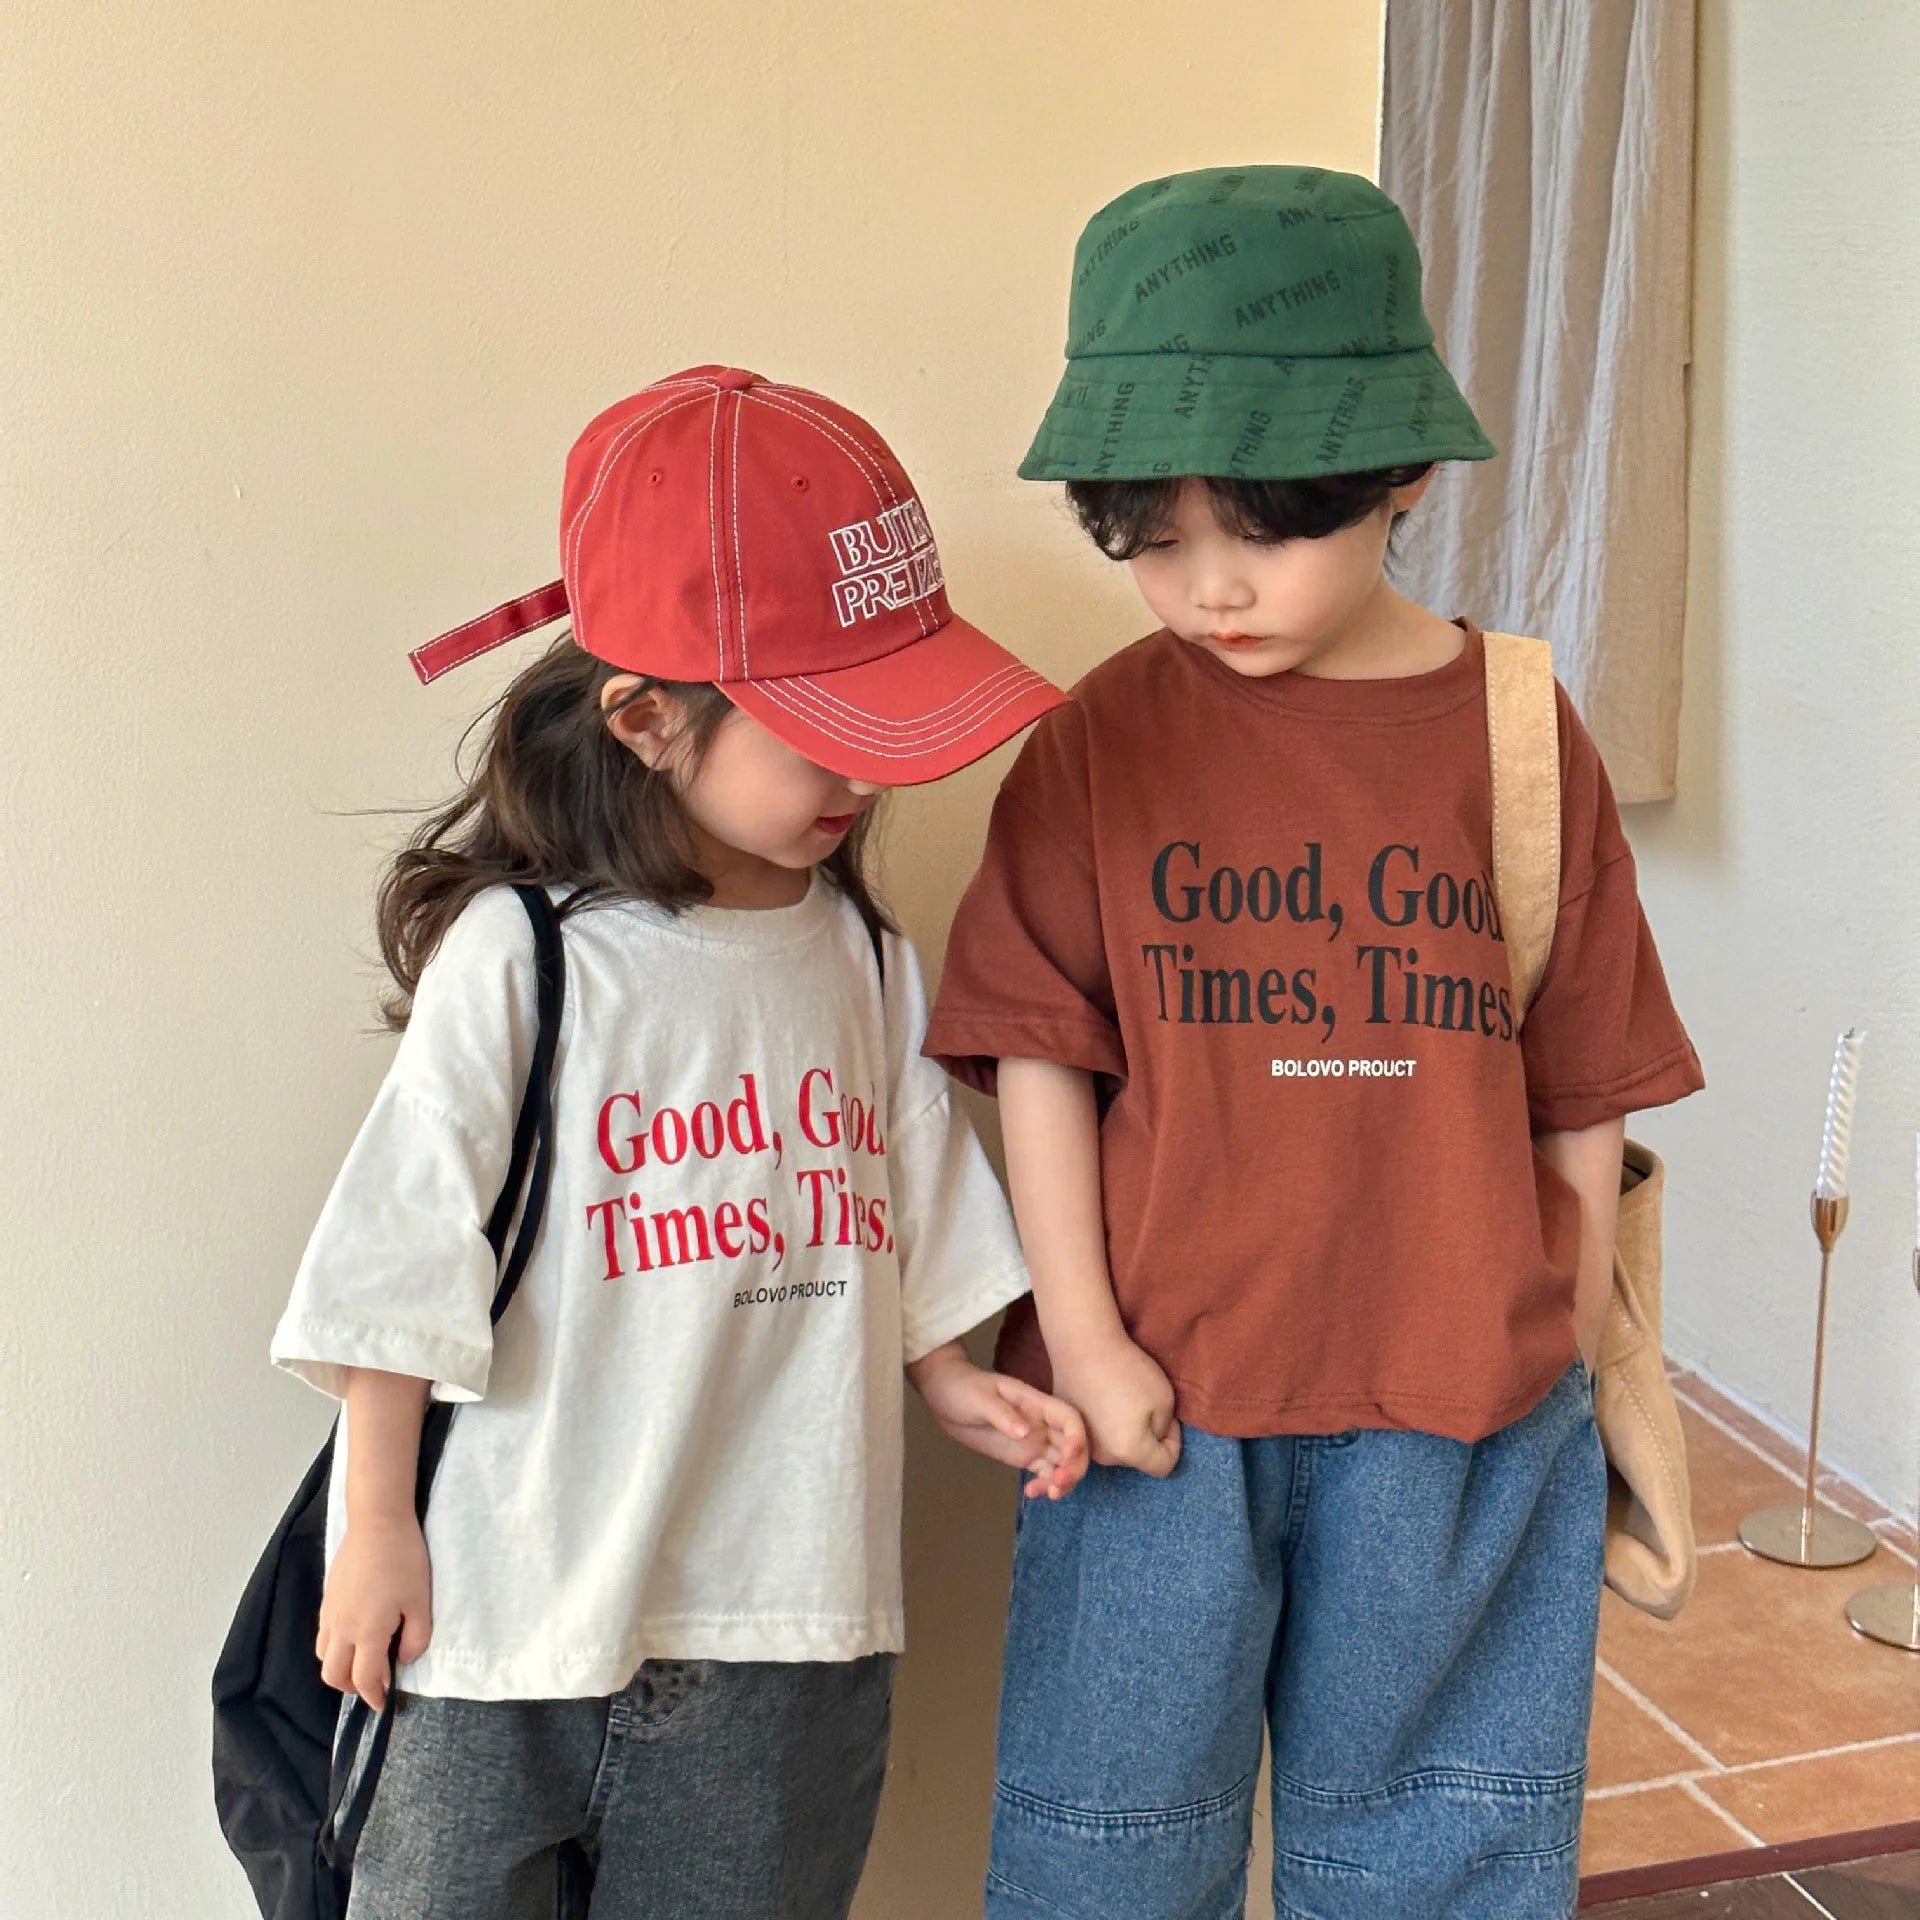 kids oversized tshirt , unisex kids top, childrens tshirt, positive quote tshirts for kids, brown tshirt, good times tshirt for boys and girls for baby toddlers and up to 12Y